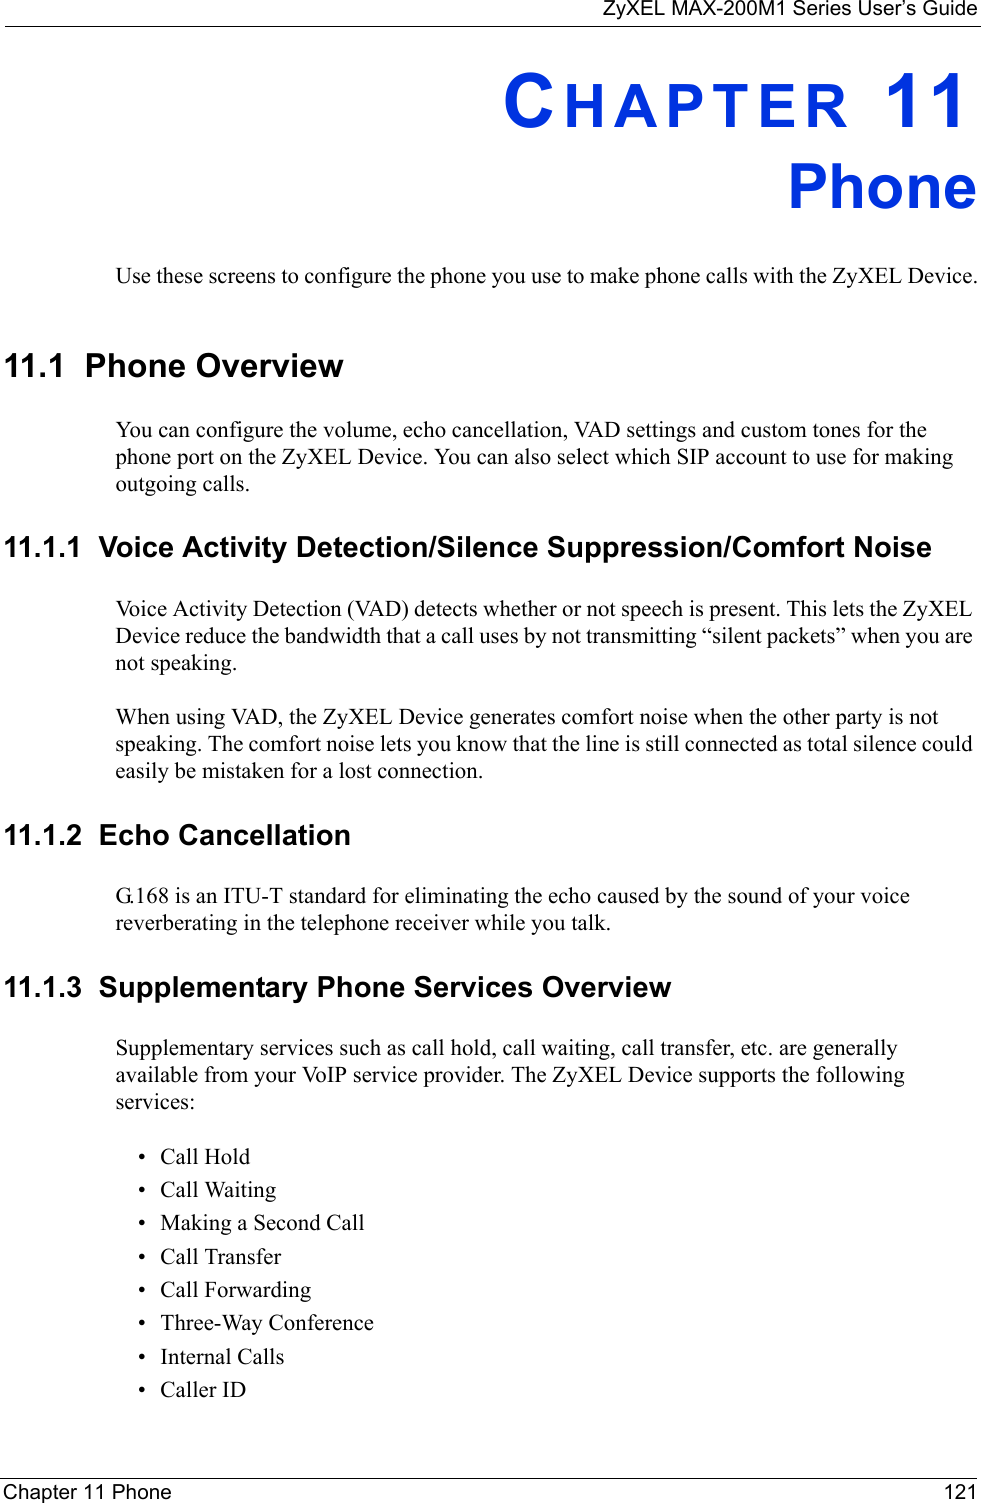 ZyXEL MAX-200M1 Series User’s GuideChapter 11 Phone 121CHAPTER 11PhoneUse these screens to configure the phone you use to make phone calls with the ZyXEL Device.11.1  Phone OverviewYou can configure the volume, echo cancellation, VAD settings and custom tones for the phone port on the ZyXEL Device. You can also select which SIP account to use for making outgoing calls.11.1.1  Voice Activity Detection/Silence Suppression/Comfort NoiseVoice Activity Detection (VAD) detects whether or not speech is present. This lets the ZyXEL Device reduce the bandwidth that a call uses by not transmitting “silent packets” when you are not speaking.When using VAD, the ZyXEL Device generates comfort noise when the other party is not speaking. The comfort noise lets you know that the line is still connected as total silence could easily be mistaken for a lost connection.11.1.2  Echo Cancellation G.168 is an ITU-T standard for eliminating the echo caused by the sound of your voice reverberating in the telephone receiver while you talk.11.1.3  Supplementary Phone Services OverviewSupplementary services such as call hold, call waiting, call transfer, etc. are generally available from your VoIP service provider. The ZyXEL Device supports the following services:• Call Hold• Call Waiting• Making a Second Call• Call Transfer• Call Forwarding• Three-Way Conference• Internal Calls• Caller ID